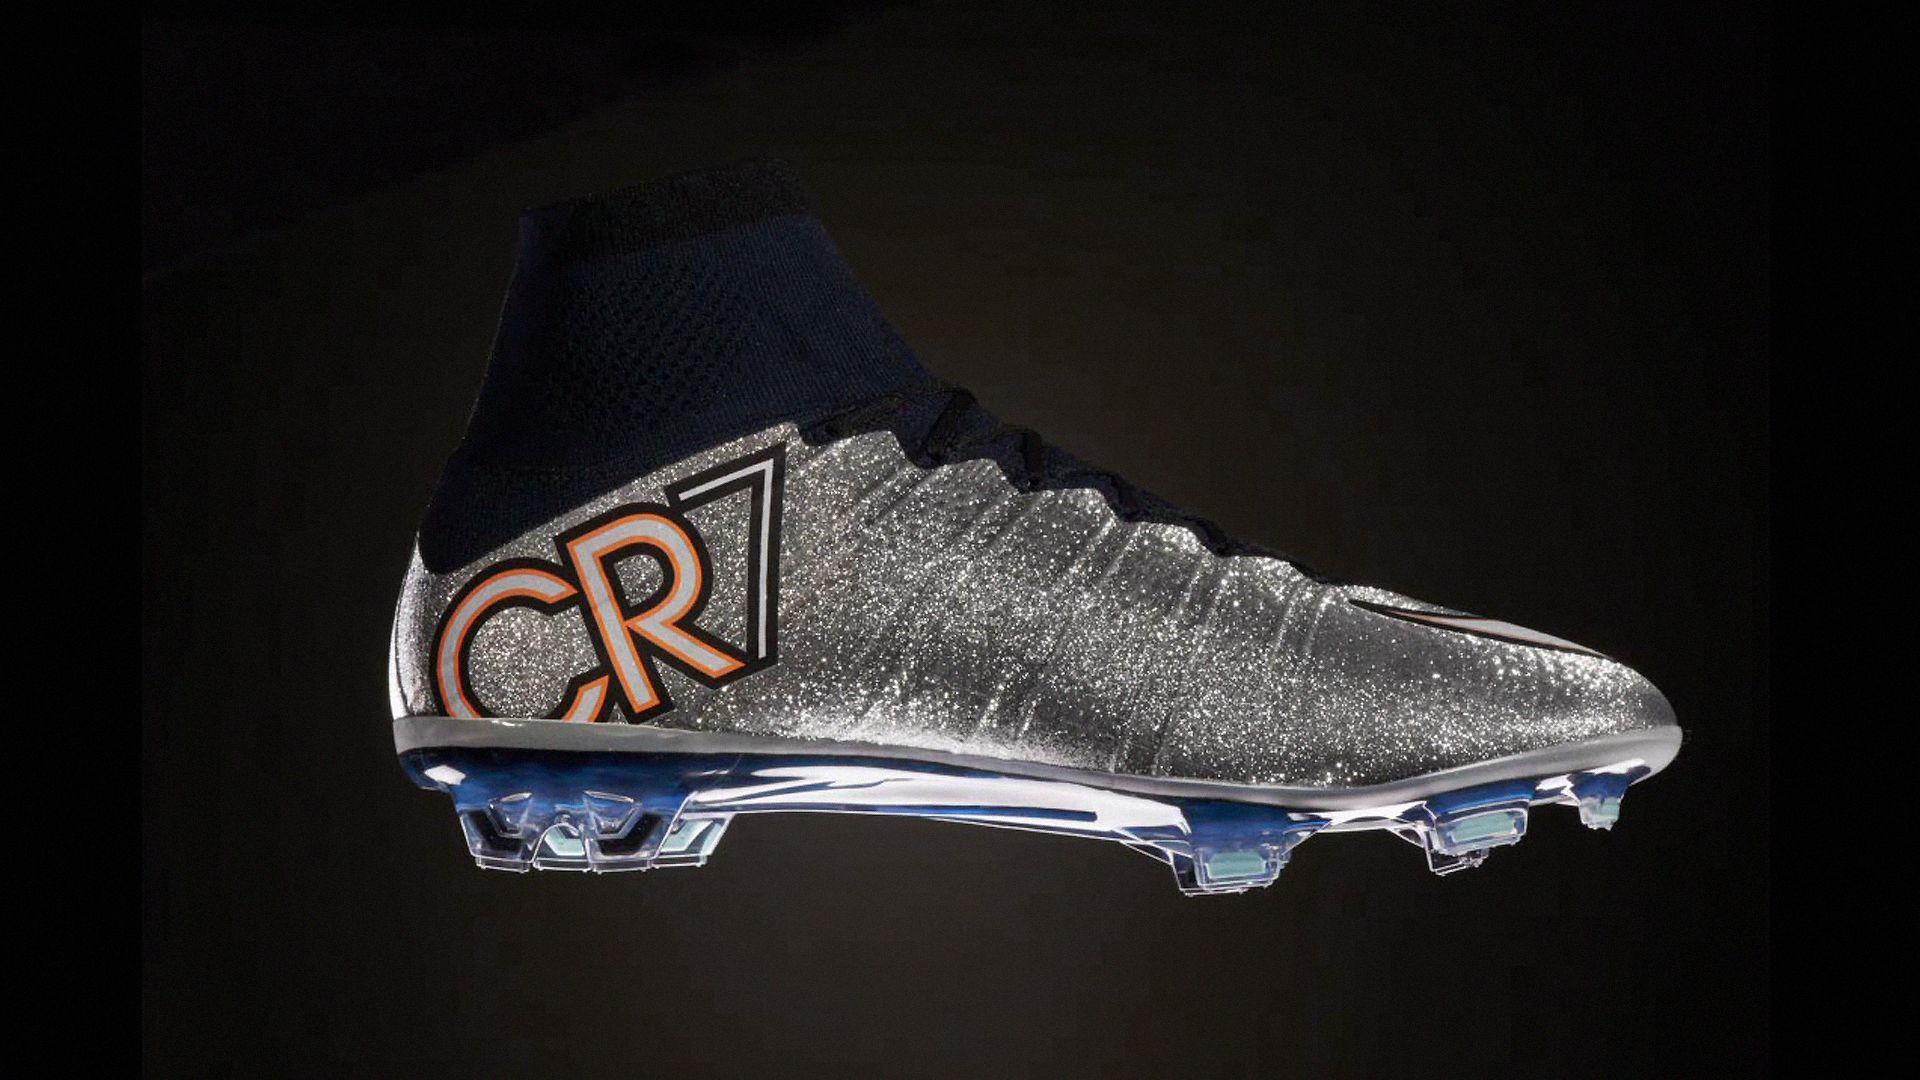 Introducing the Nike Mercurial Superfly CR7 Silverware Boots